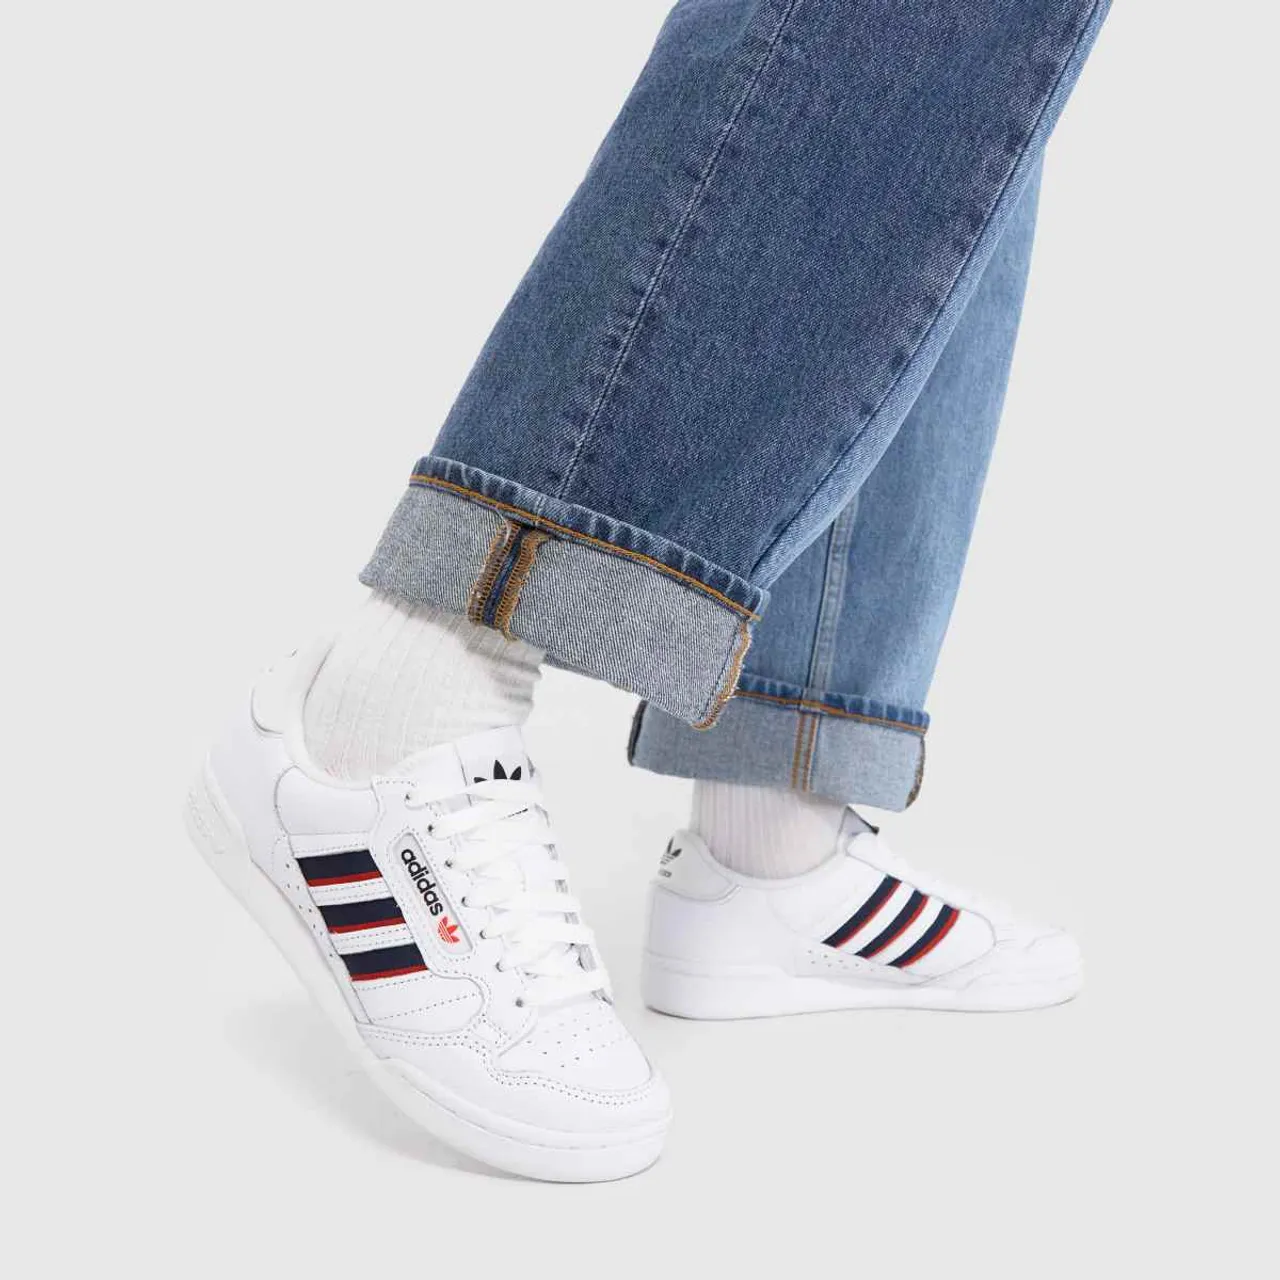 Adidas Continental 80 Stripe Trainers In White & Navy